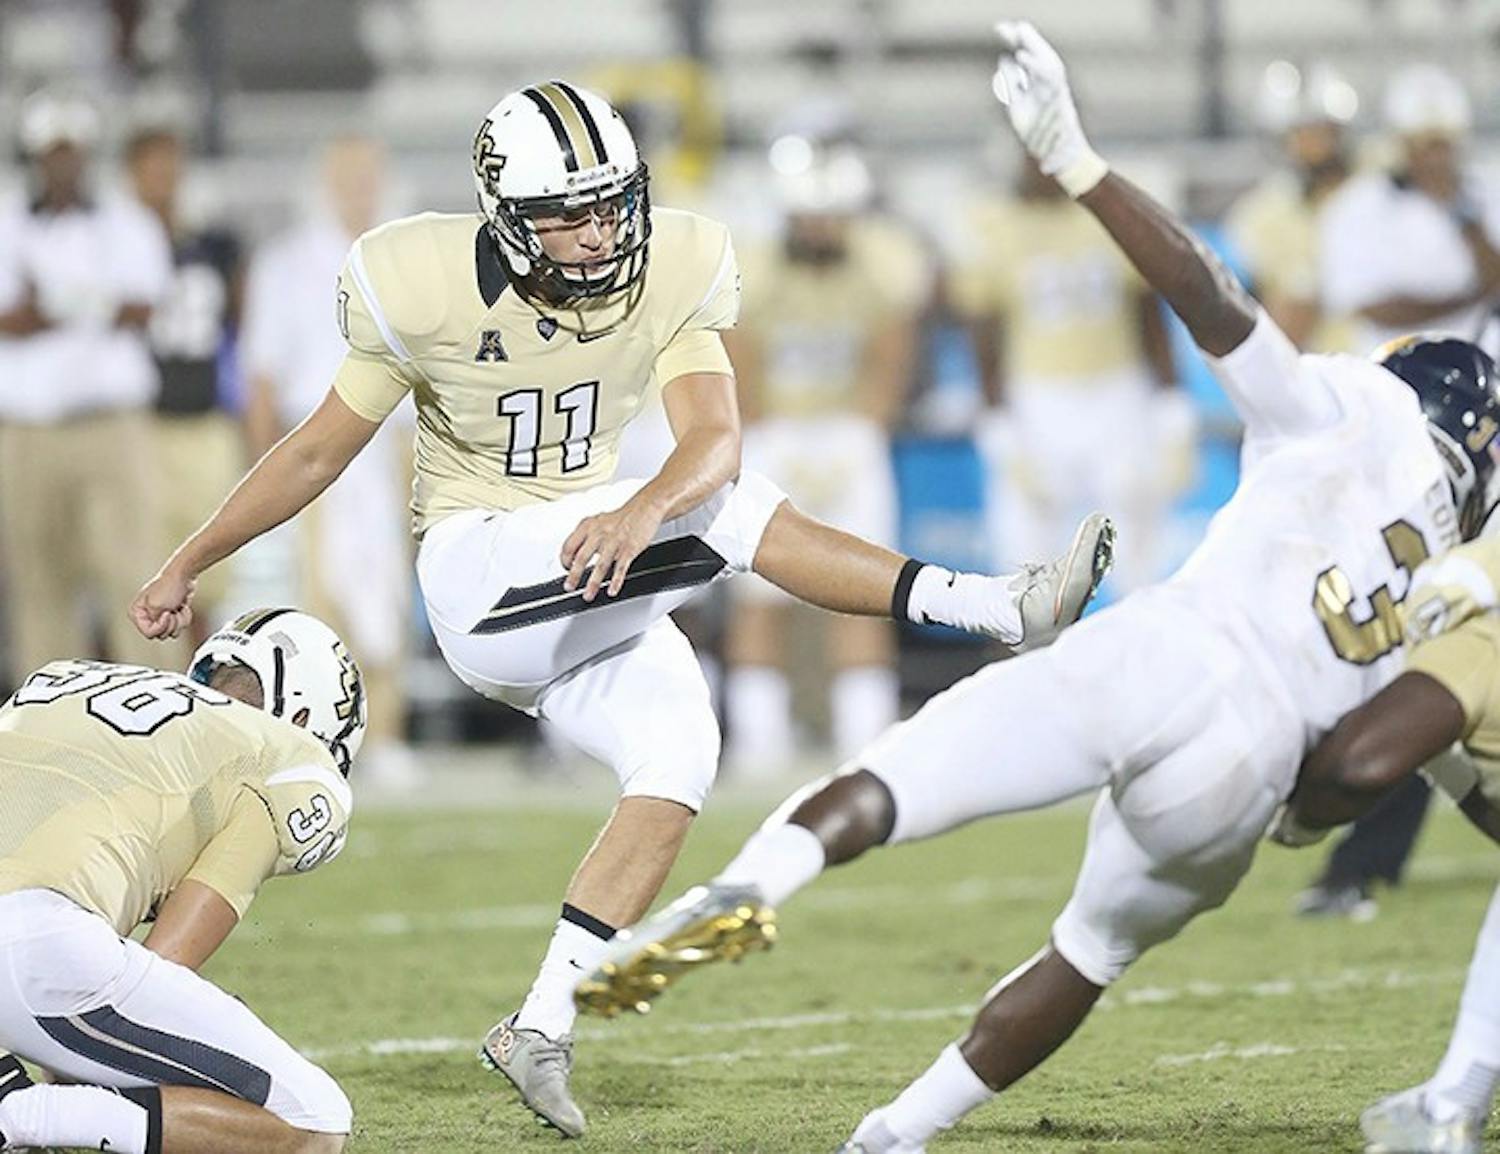 UCF kicker Matthew Wright (11) misses a field goal attempt with seconds left on the clock against Florida International at Bright House Networks Stadium in Orlando, Fla., on Thursday, Sept. 3, 2015. FIU won, 15-14. (Stephen M. Dowell/Orlando Sentinel/TNS)